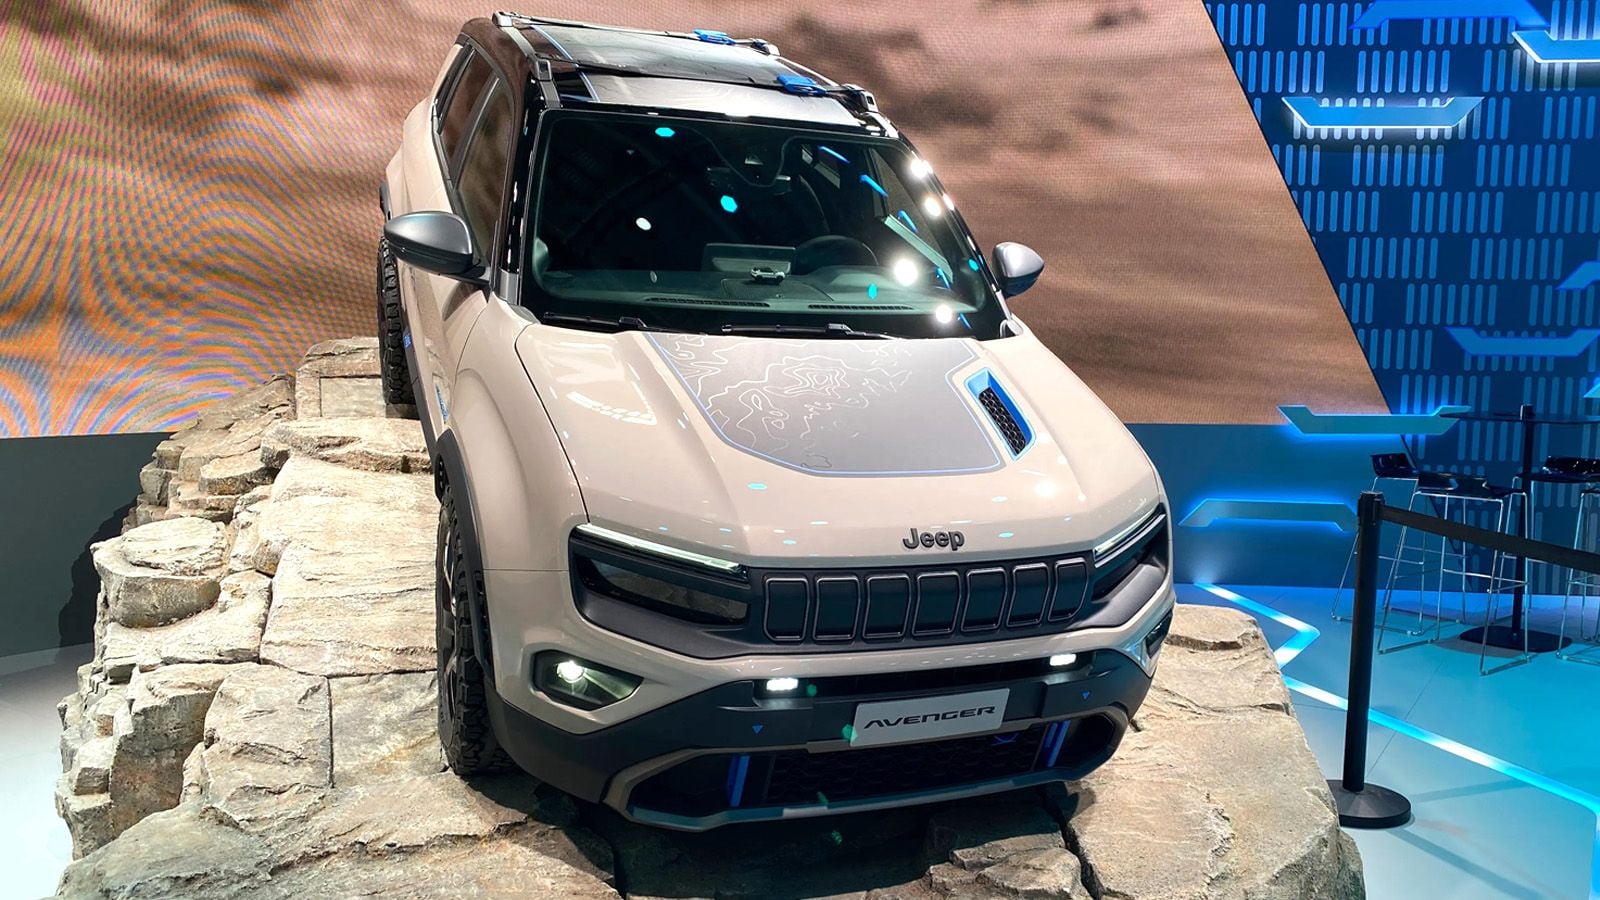 The New Jeep Avenger EV Has Some Fun Easter Eggs Hiding In Plain